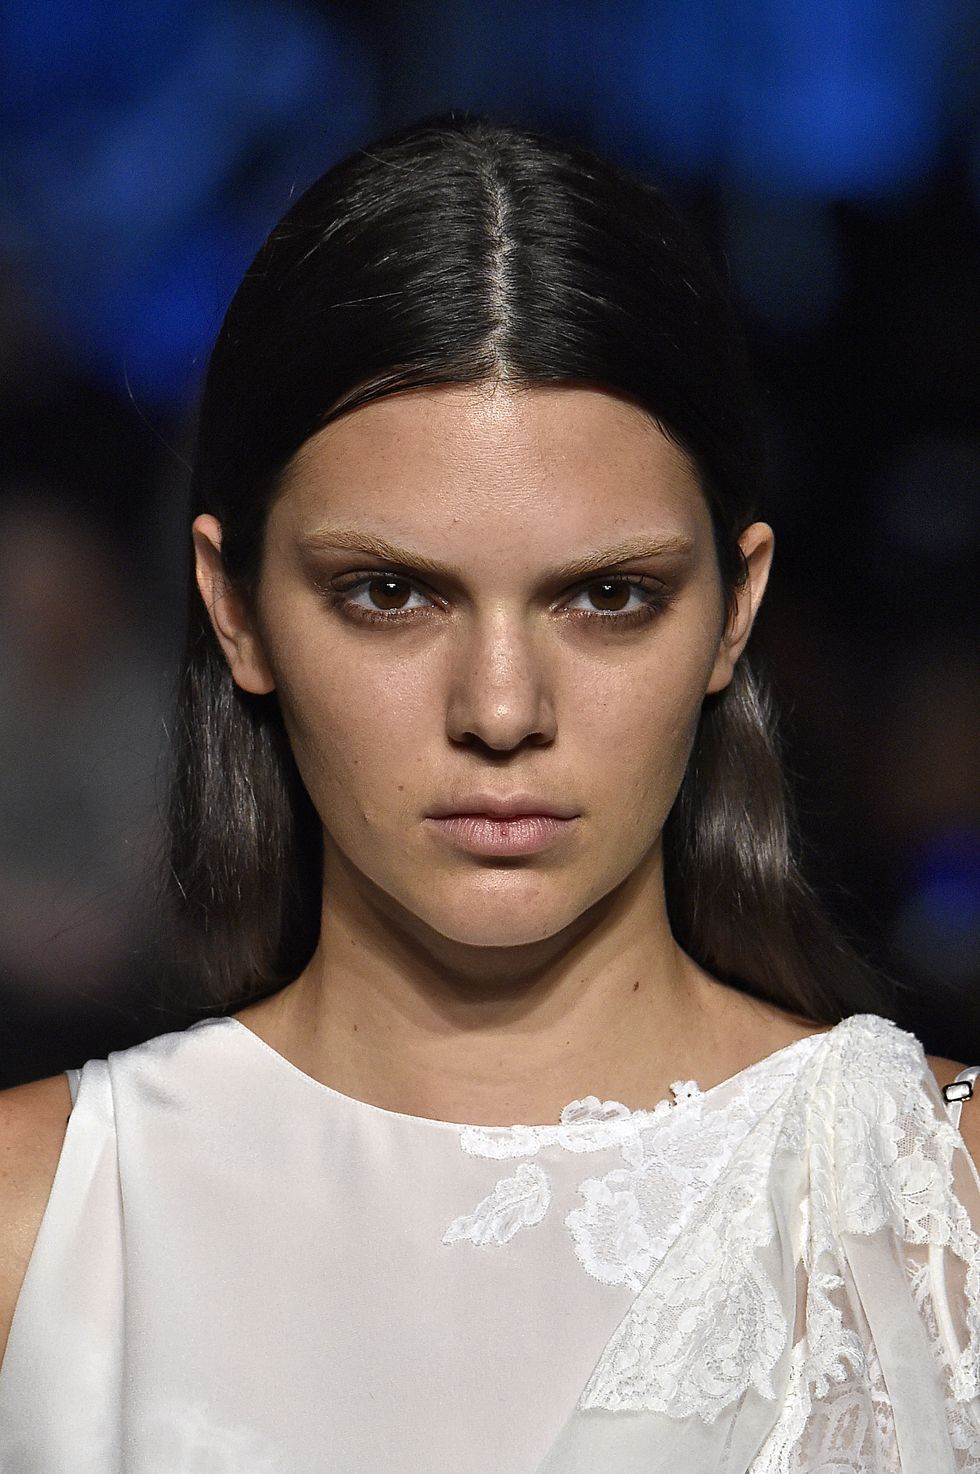 Kendall Jenner rocked the Givenchy SS16 catwalk with cool bleached brows